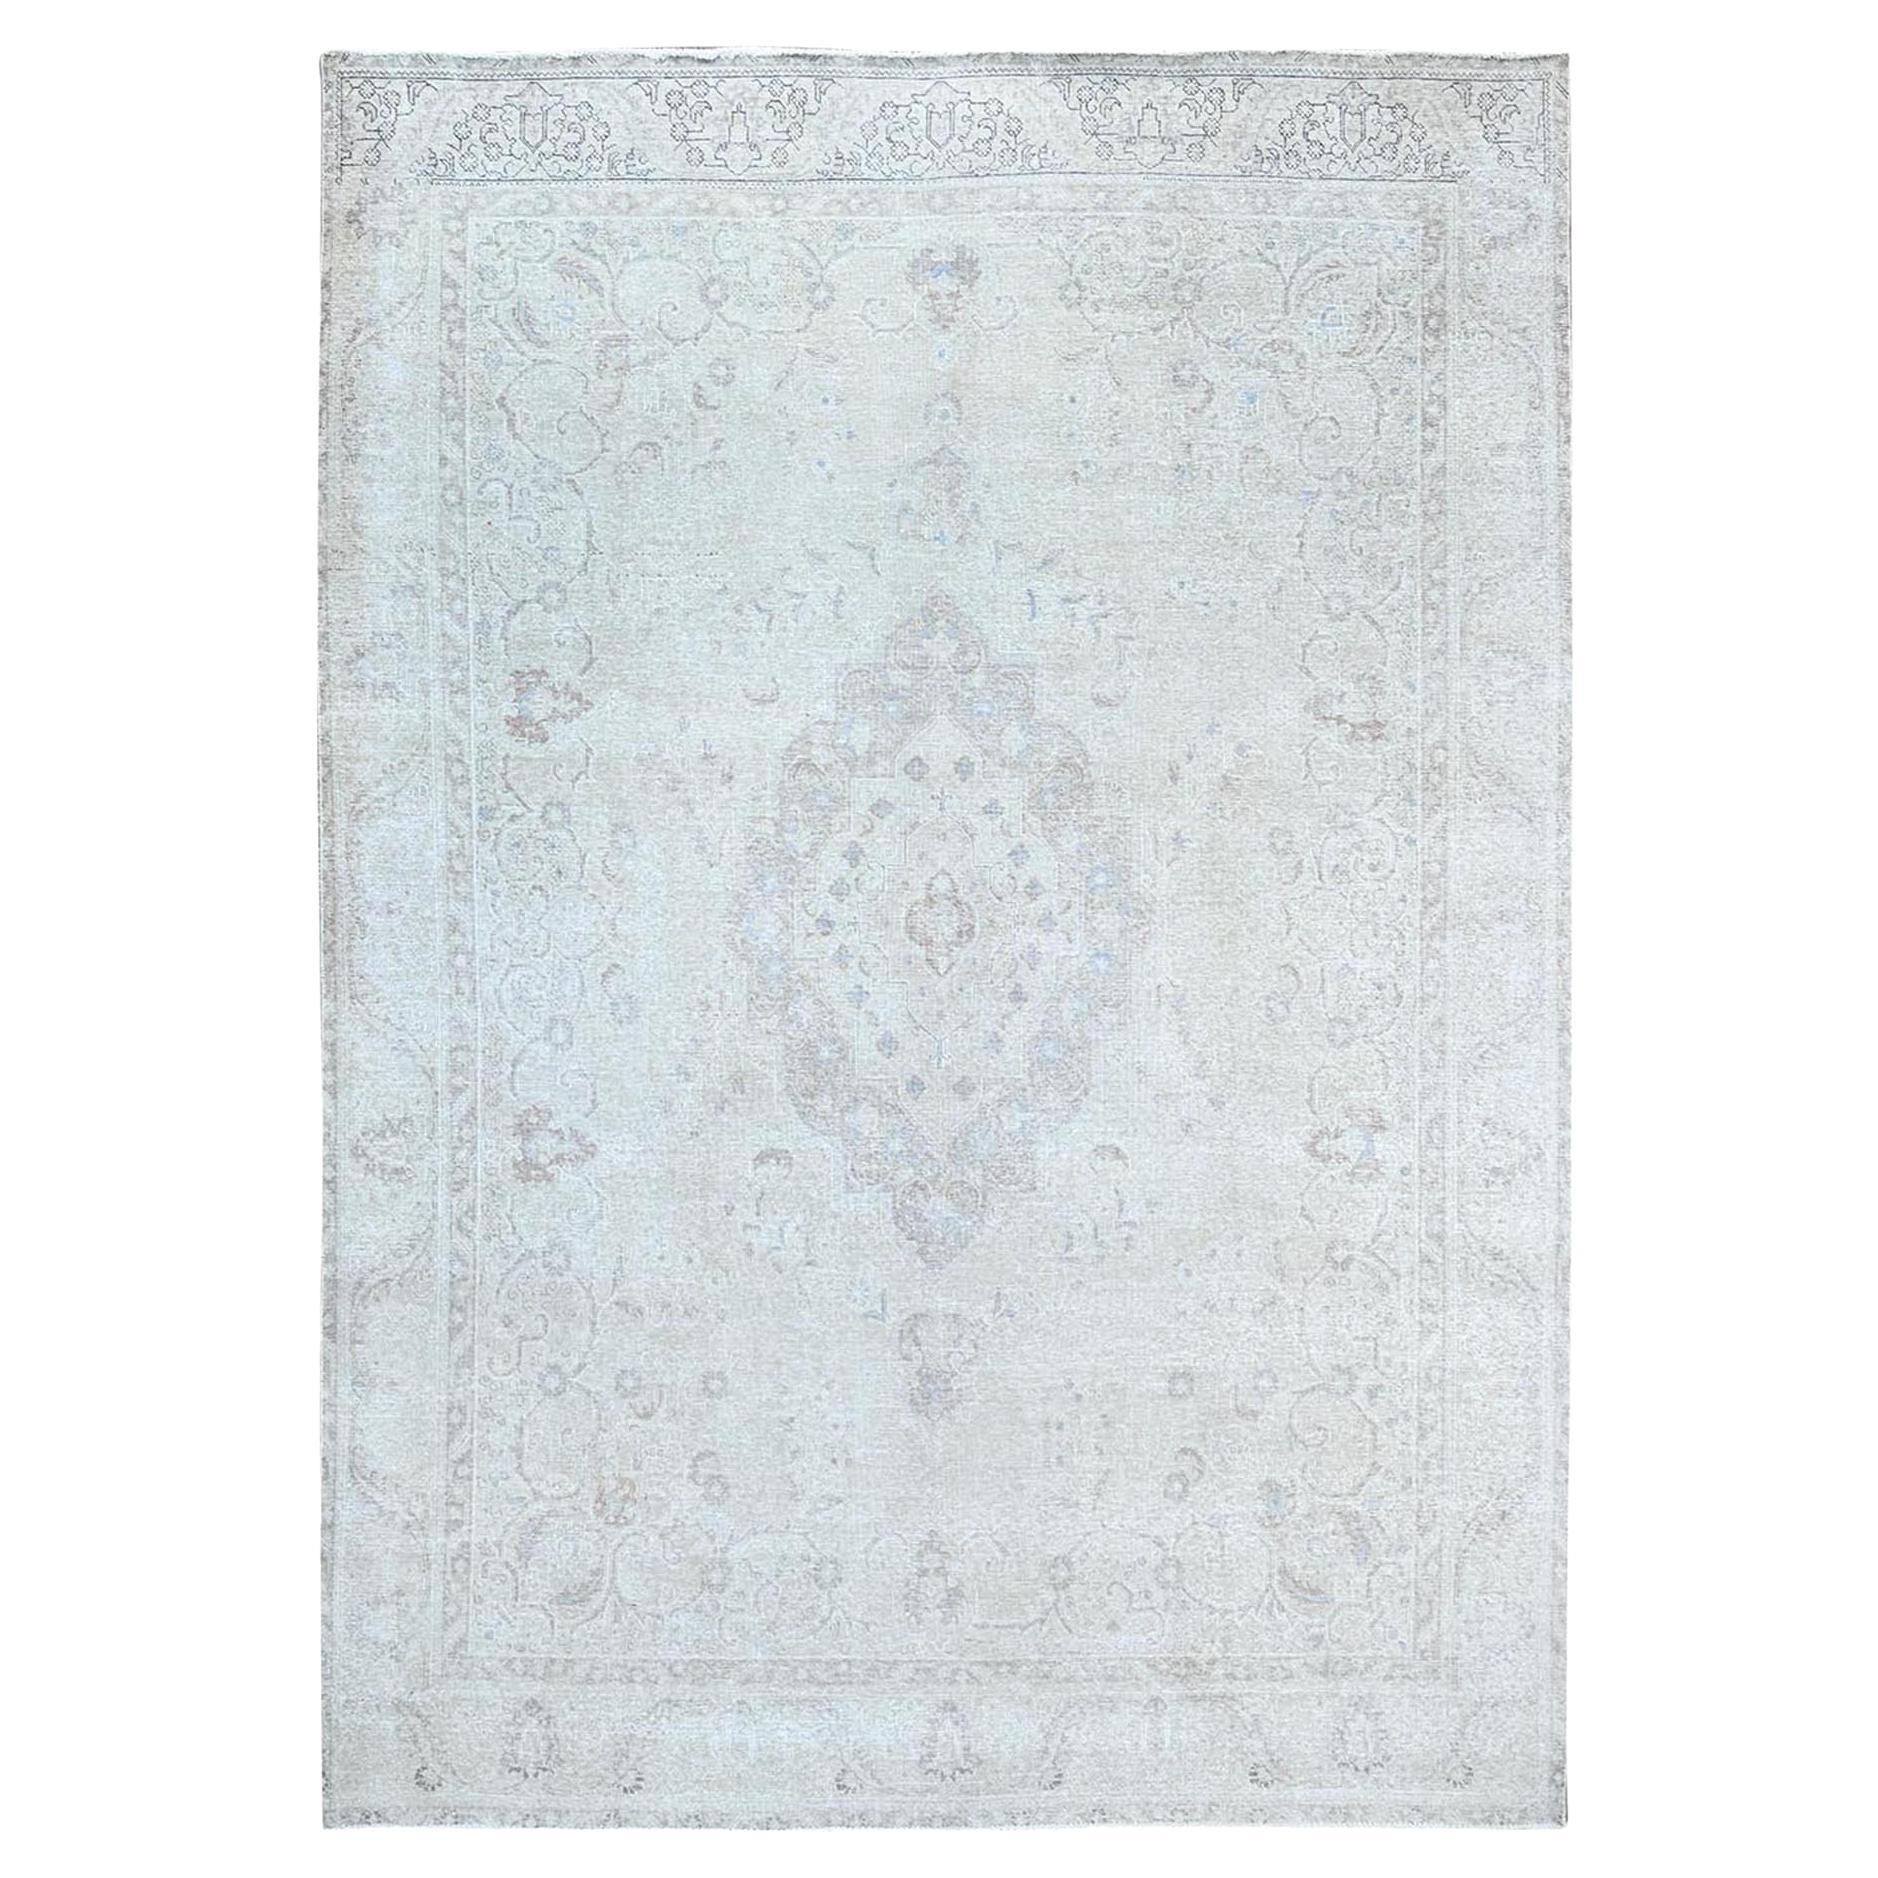 Ivory Rustic Look Wool Hand Knotted Vintage Persian White Wash Tabriz Clean Rug